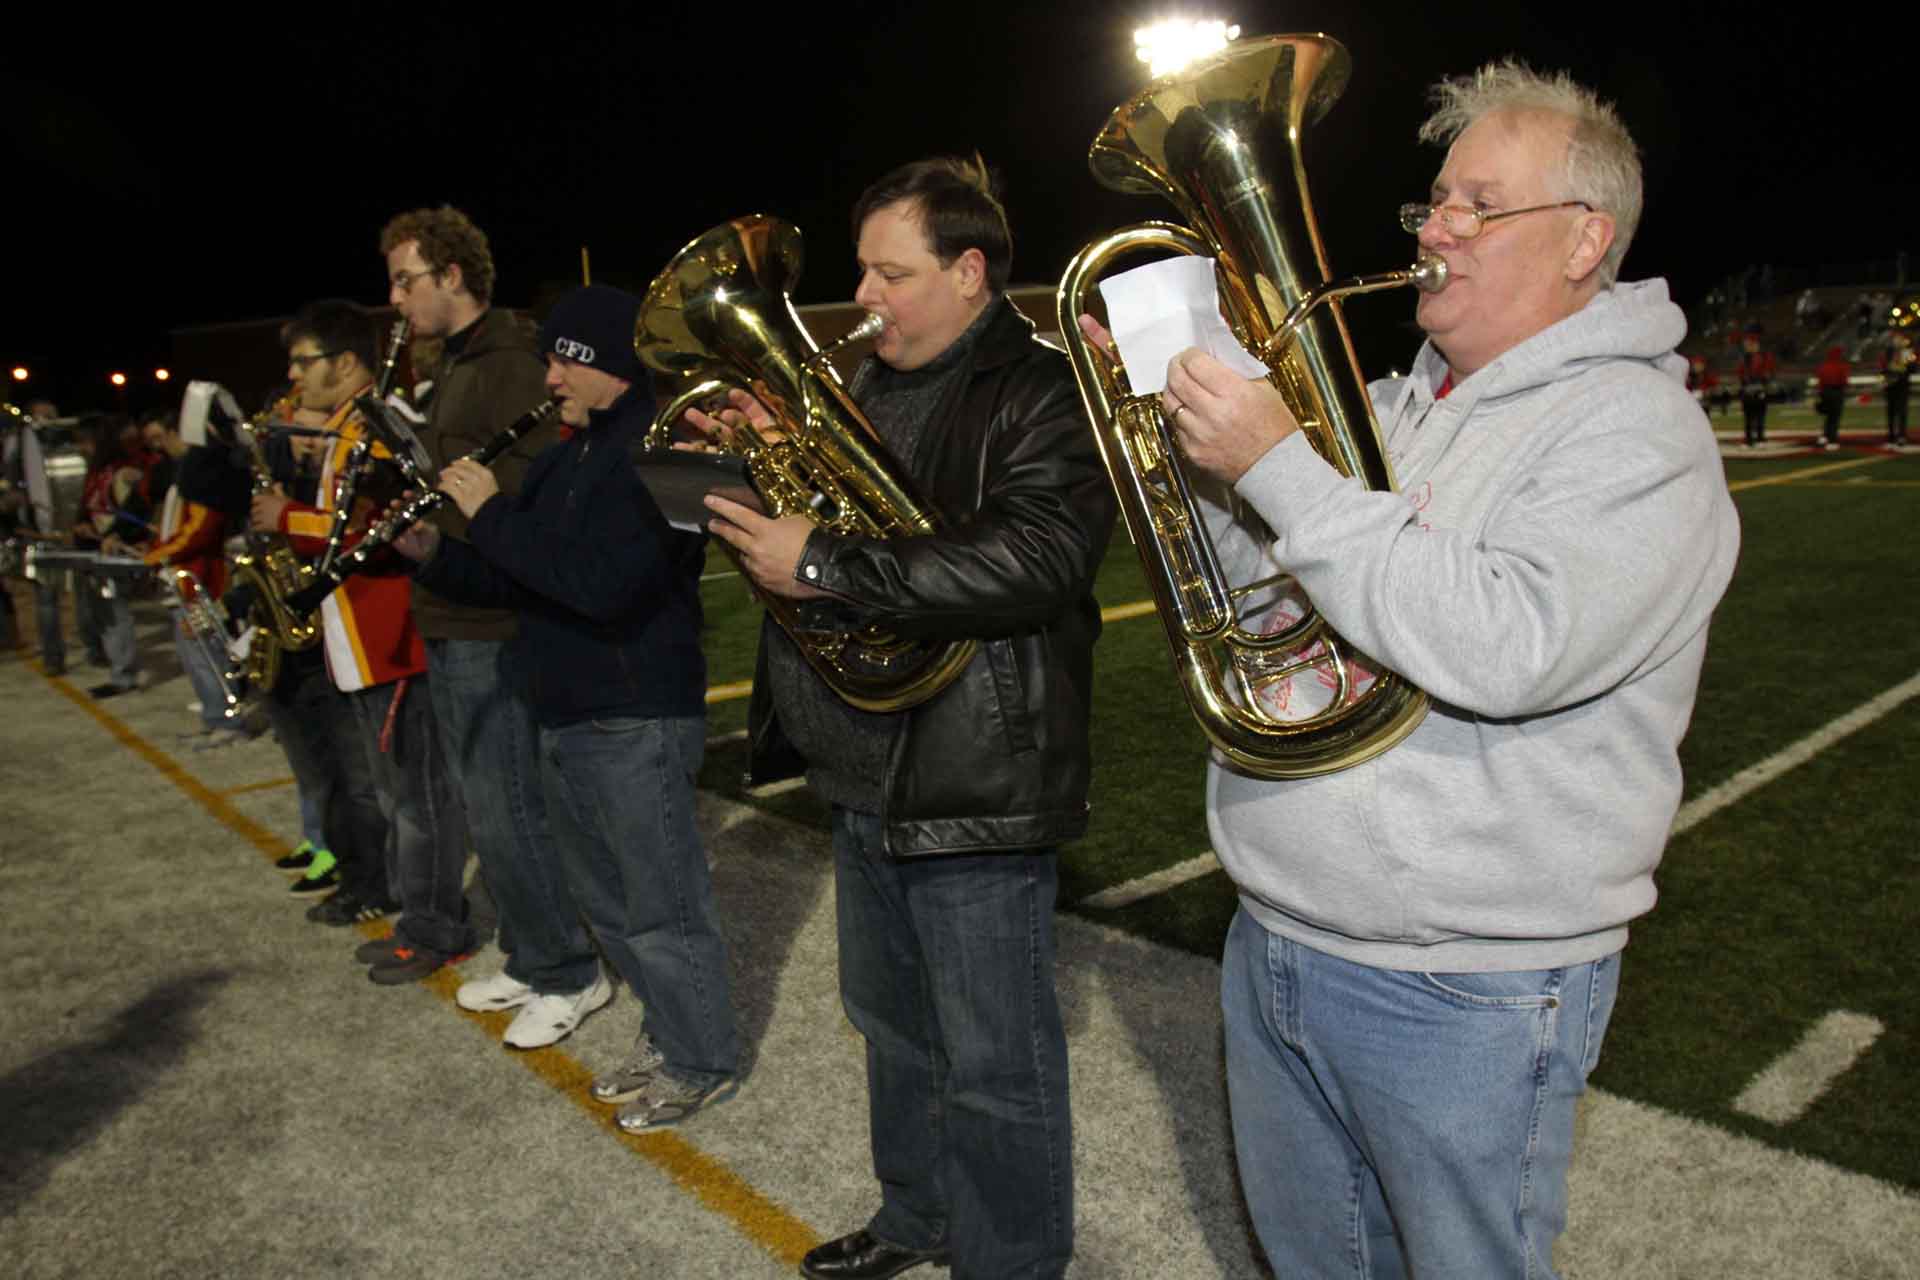 alumni-people-playing-instruments-outside-night-time